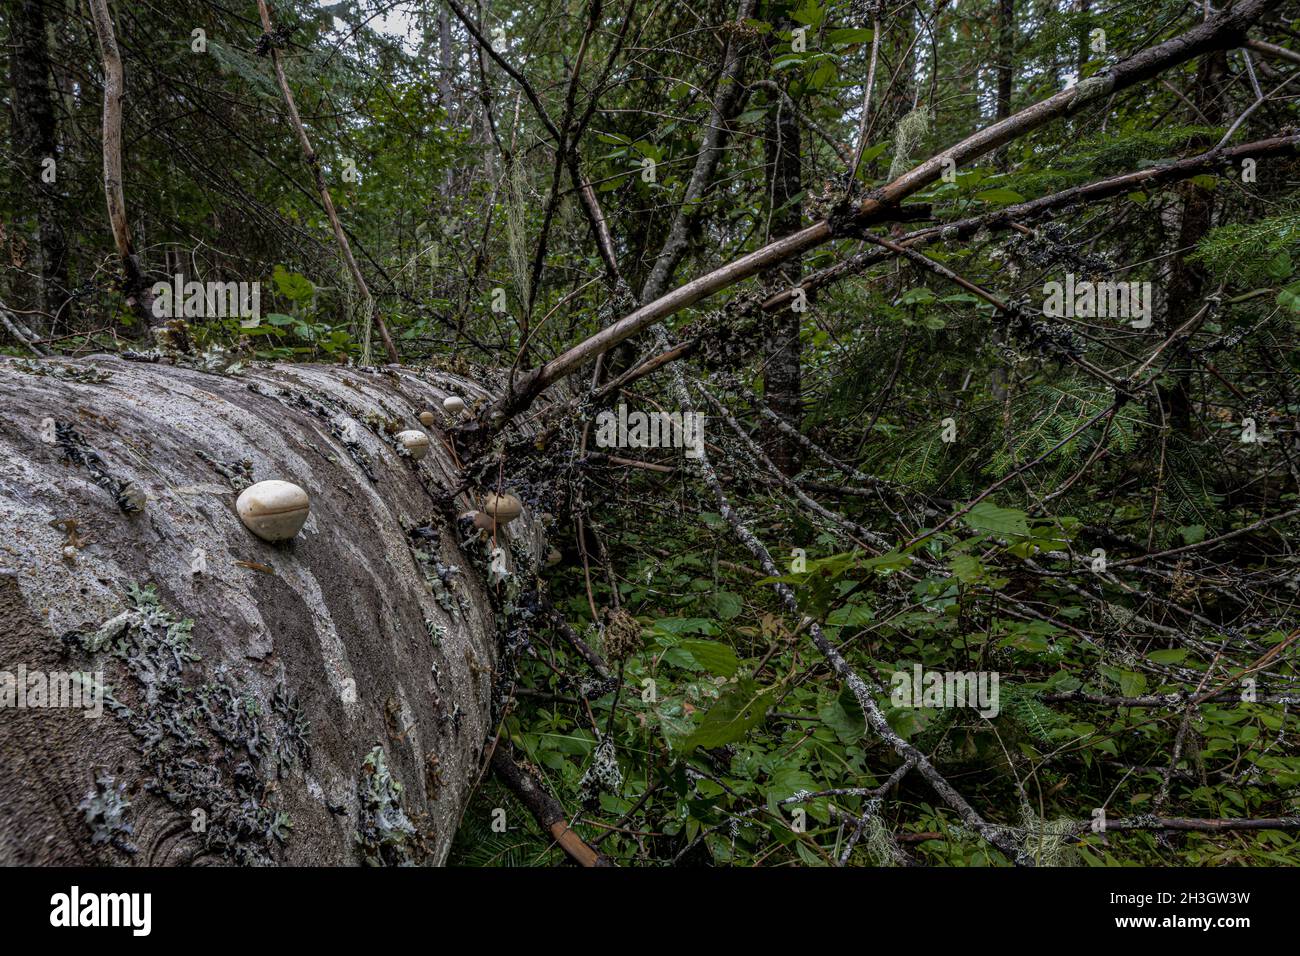 Fallen Tree with Fungi Growing out of the Trunk, Idaho Stock Photo